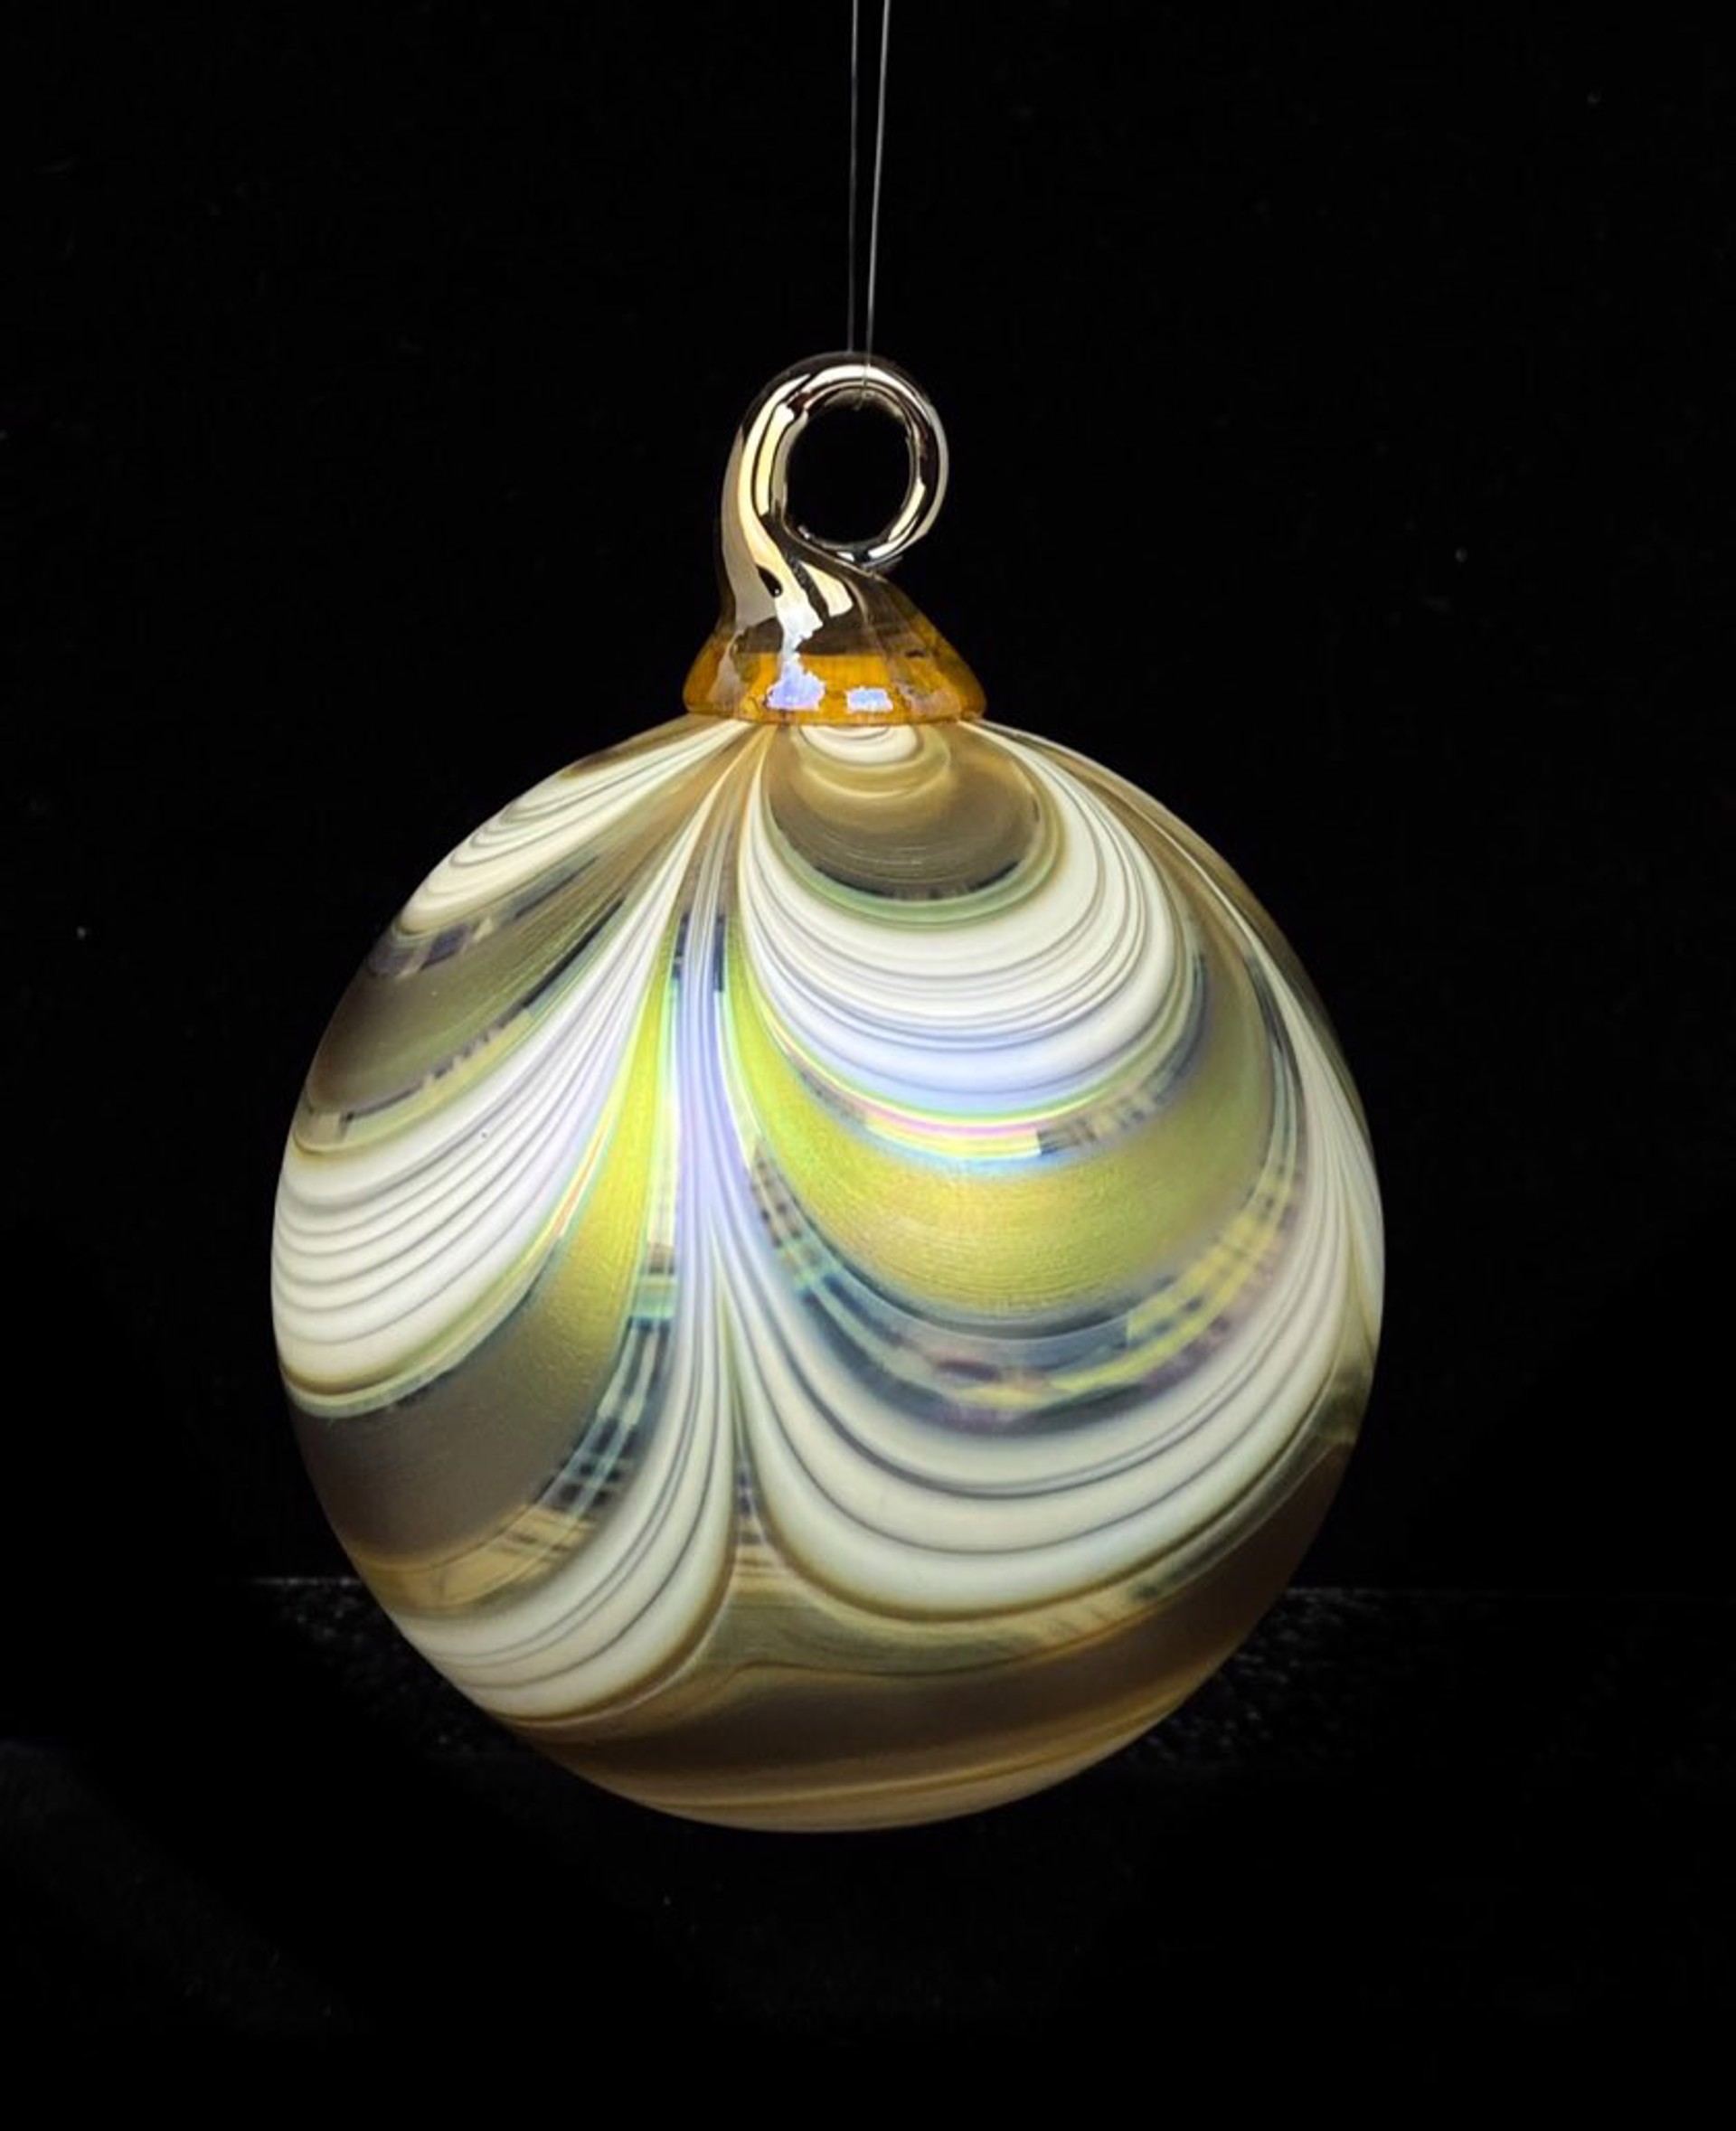 Ribbon Gold and White Ornament by Furnace Glass